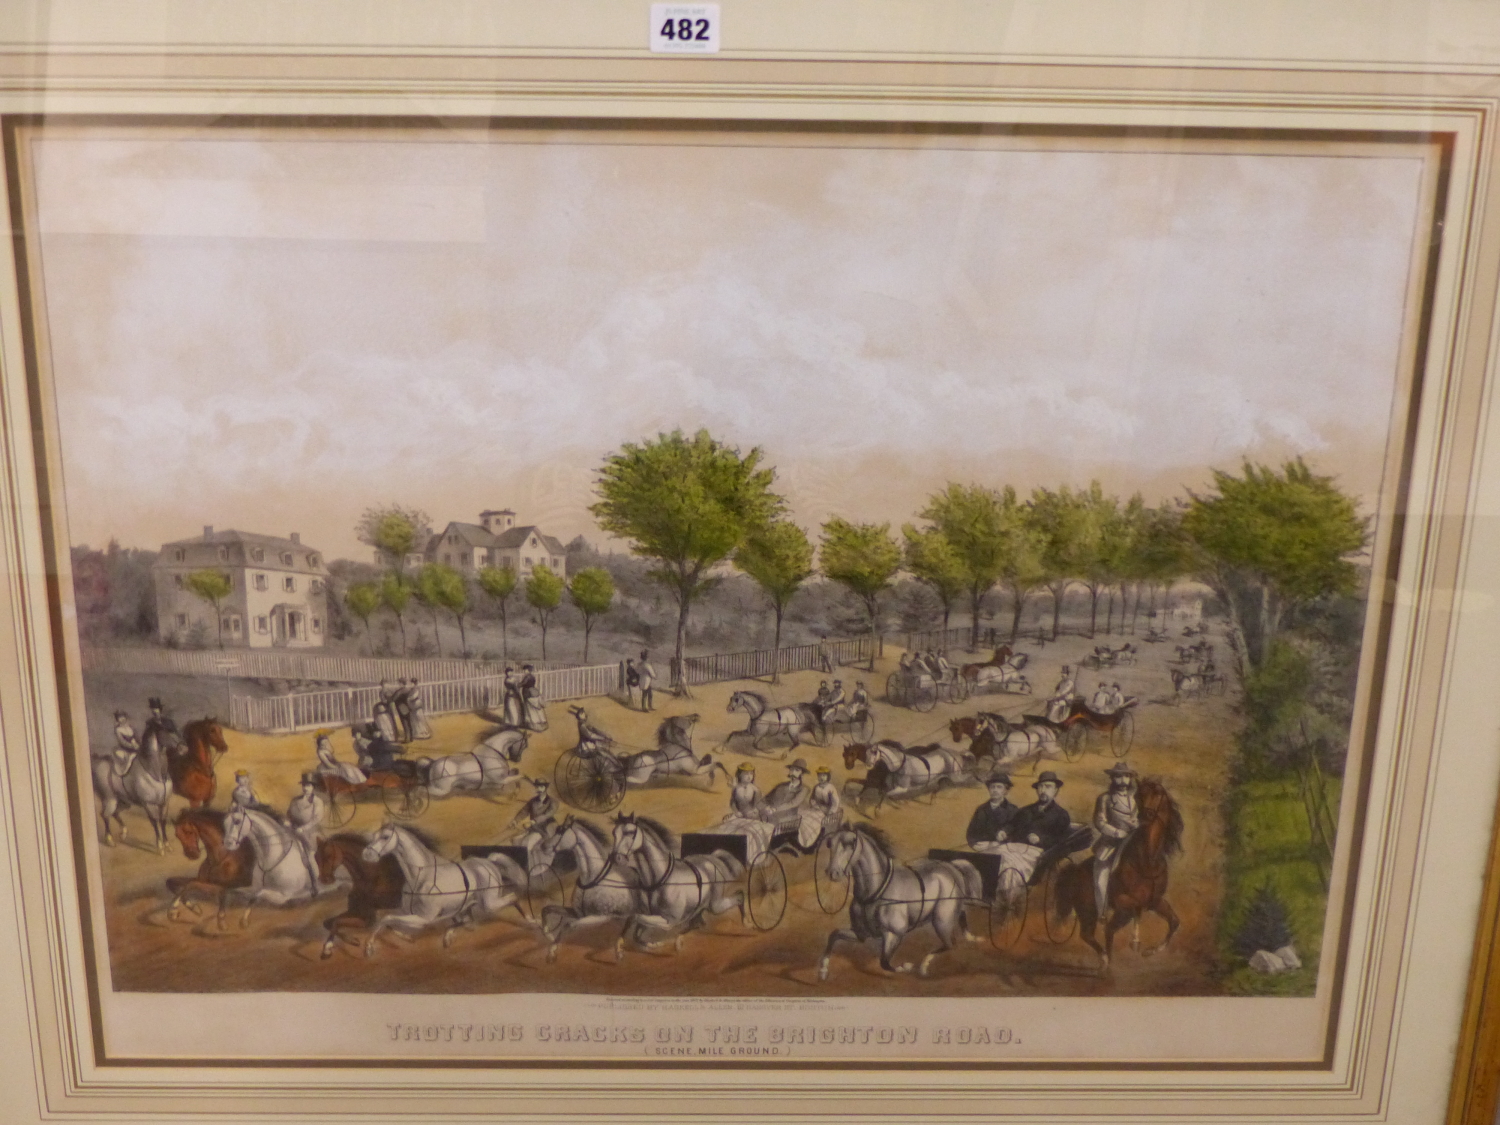 TROTTING CRACKS ON THE BRIGHTON ROAD (SCENE, MILE GROUND), 19TH CENTURY AMERICAN LITHOGRAPH WITH - Image 2 of 4